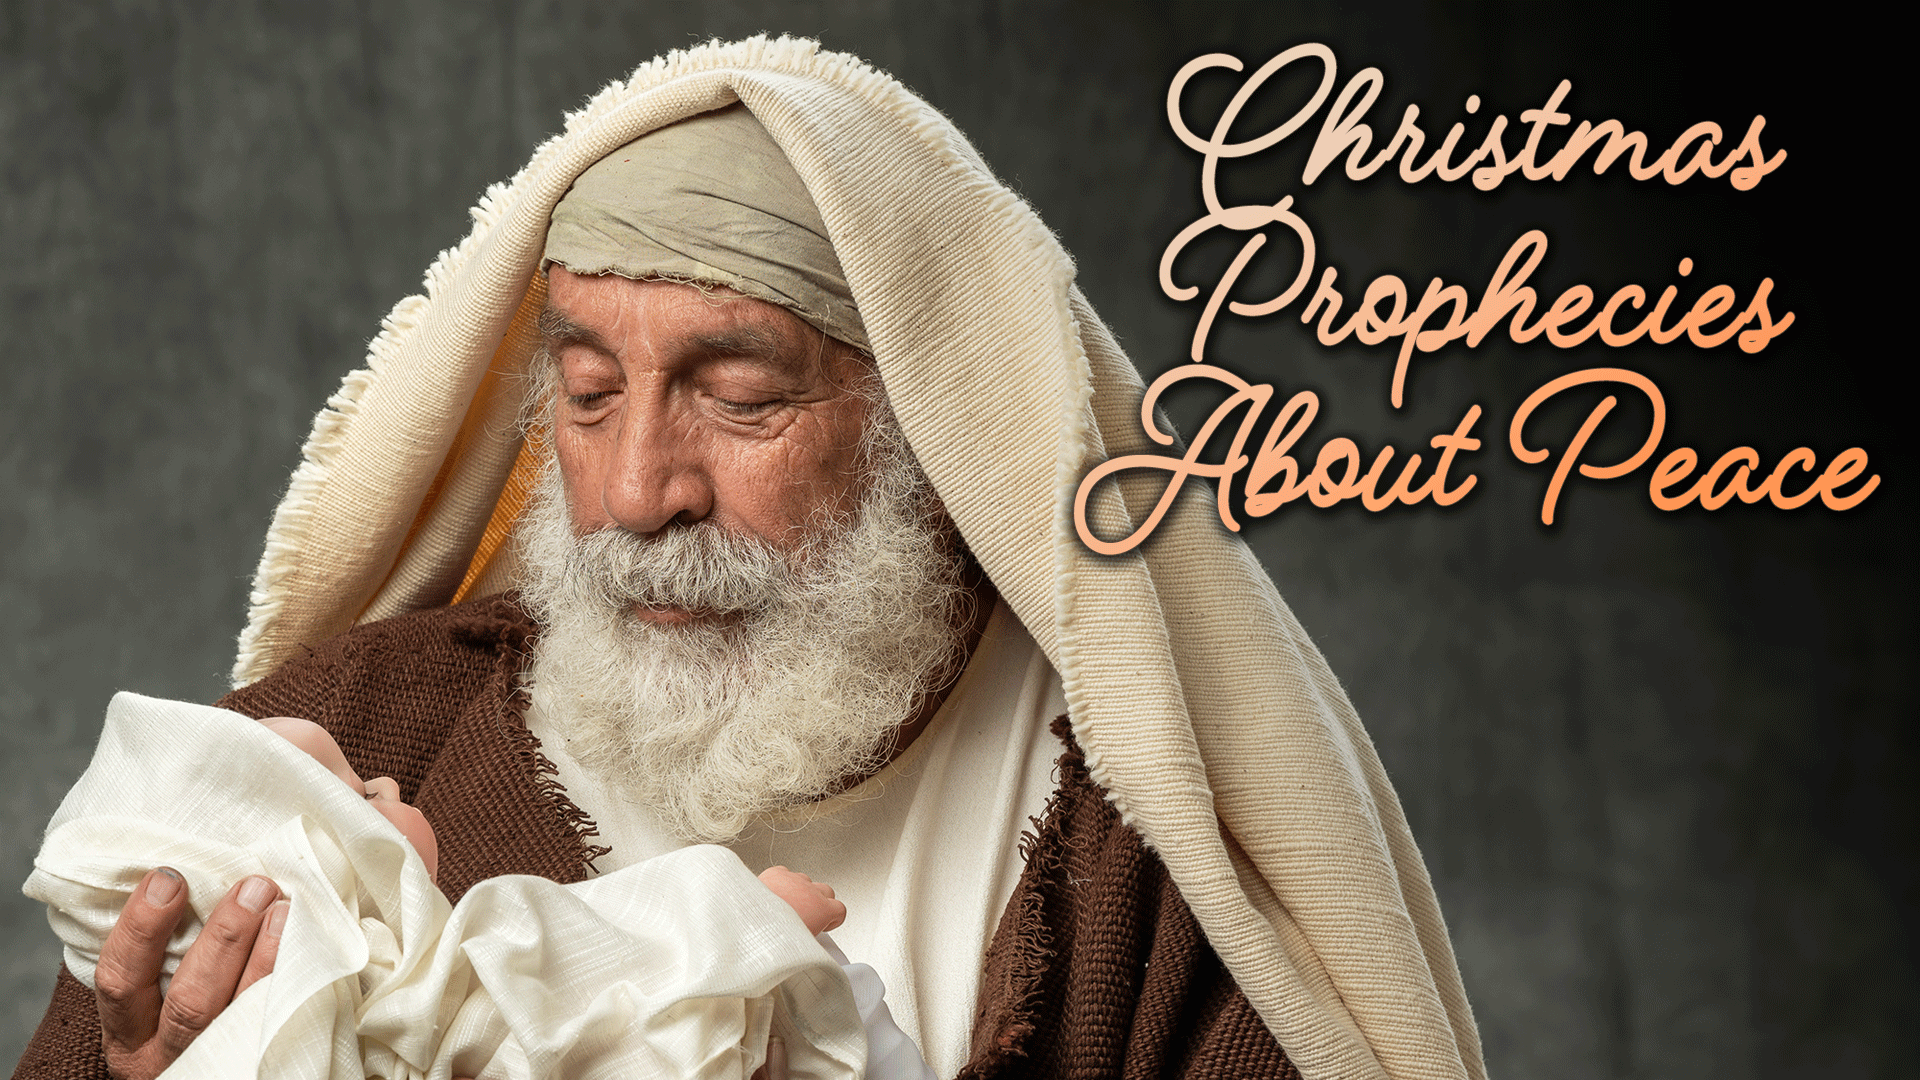 Christmas Prophecies About Peace - Thumb